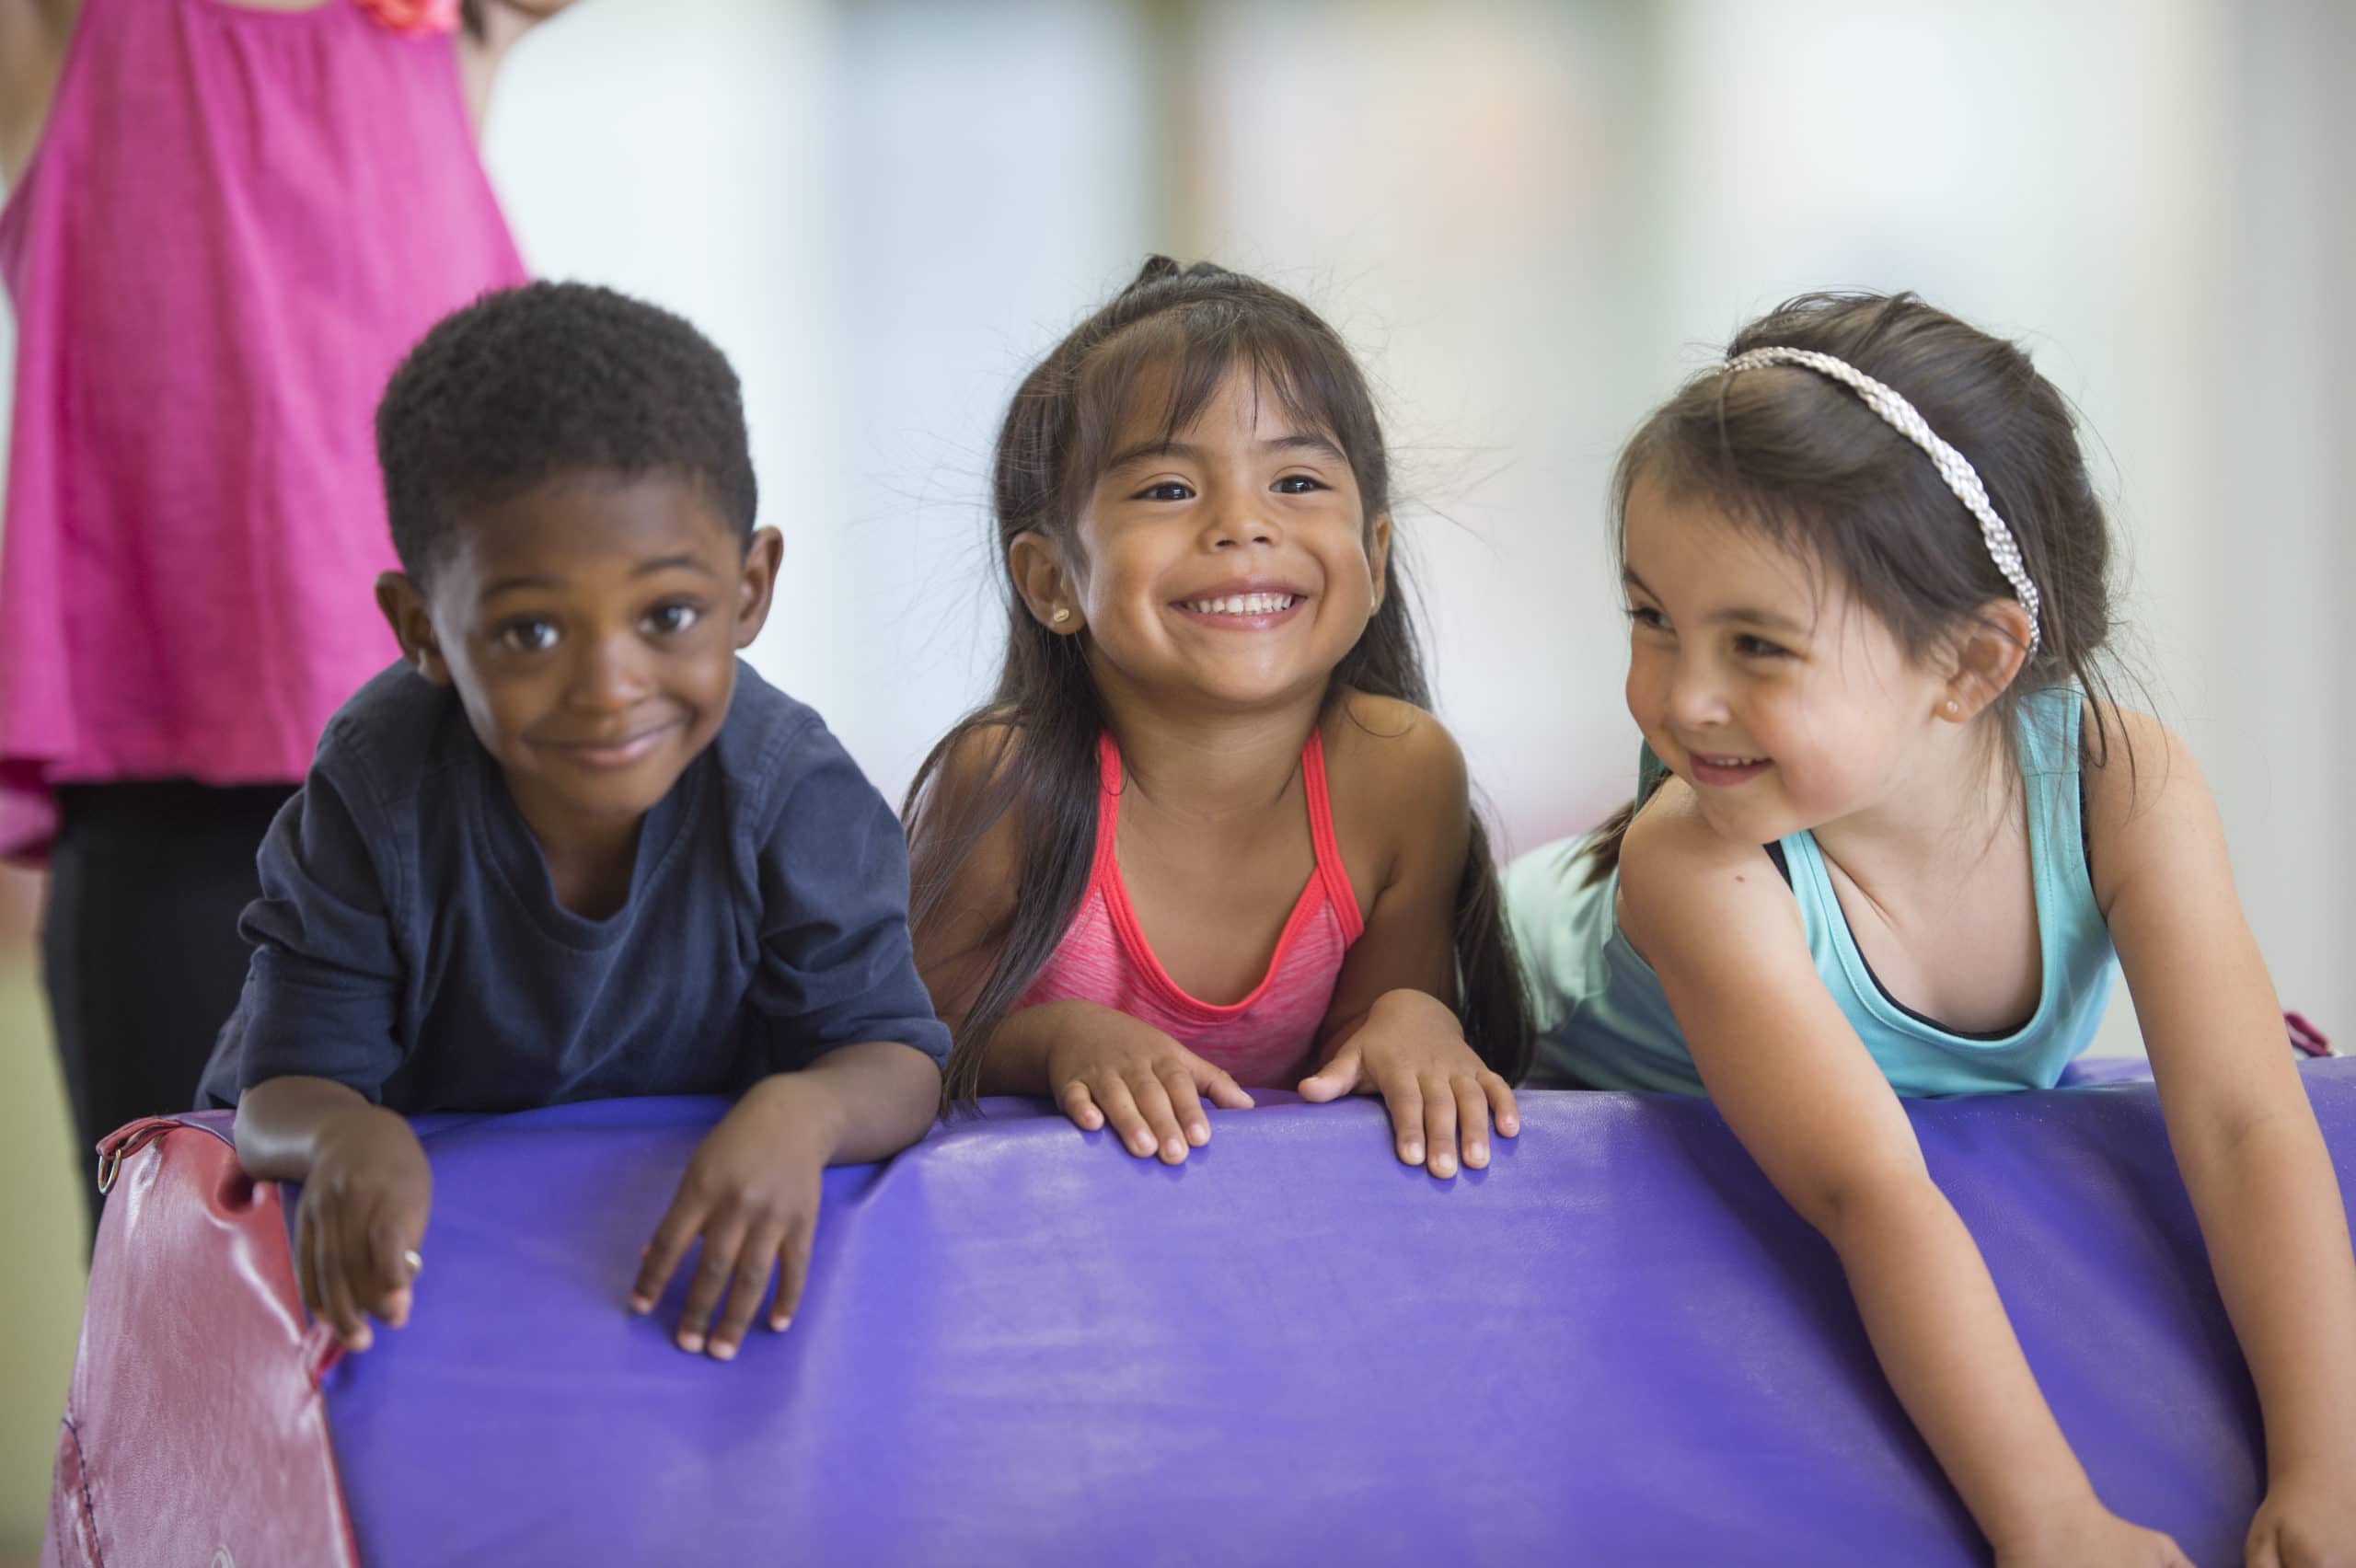 A multi-ethnic group of cute little kids are rolling on a mat together in gymnastics class.